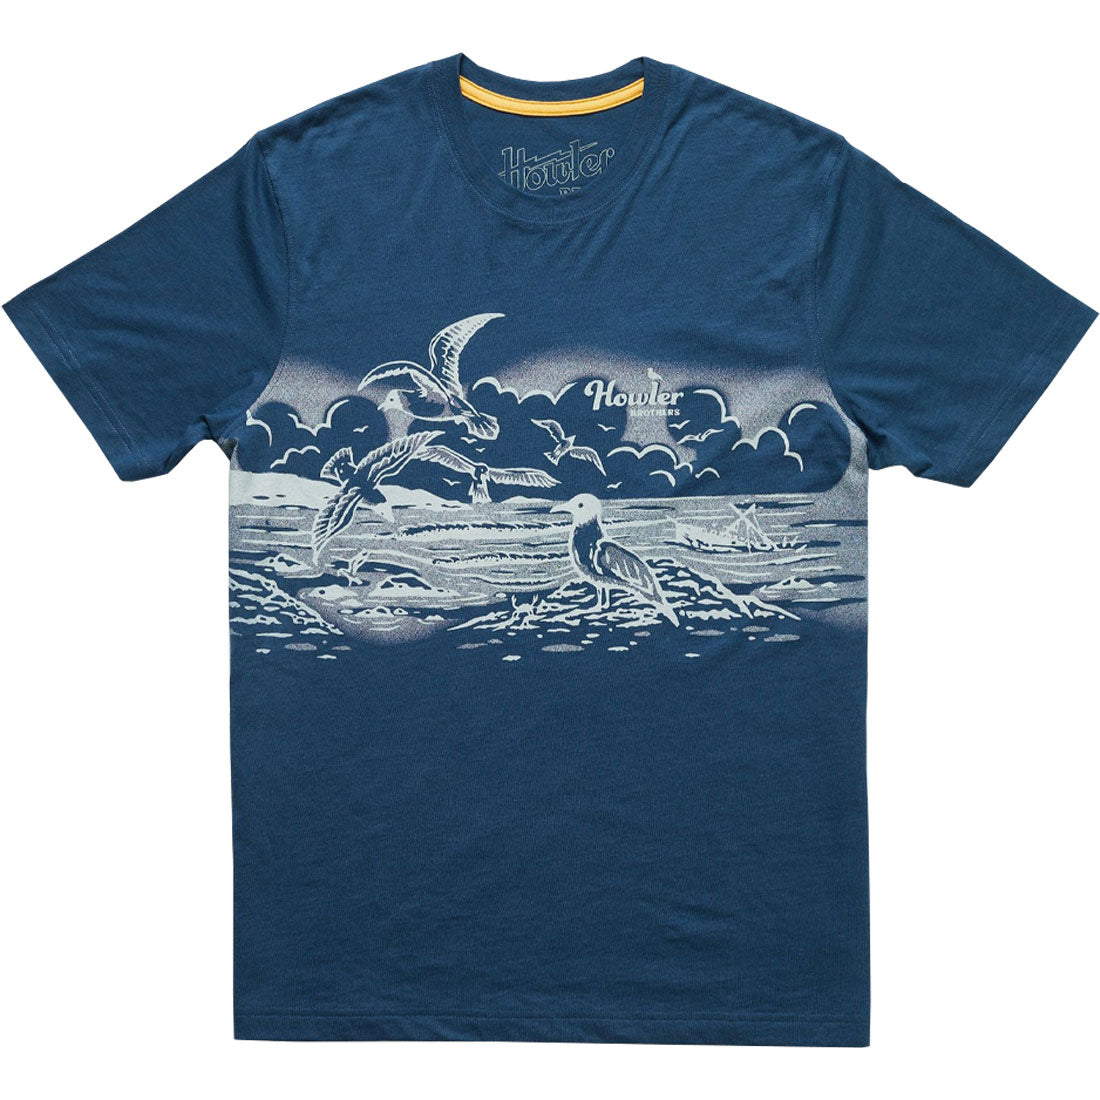 Howler Brothers Seagulls Exclusive Select T-Shirt - Men's